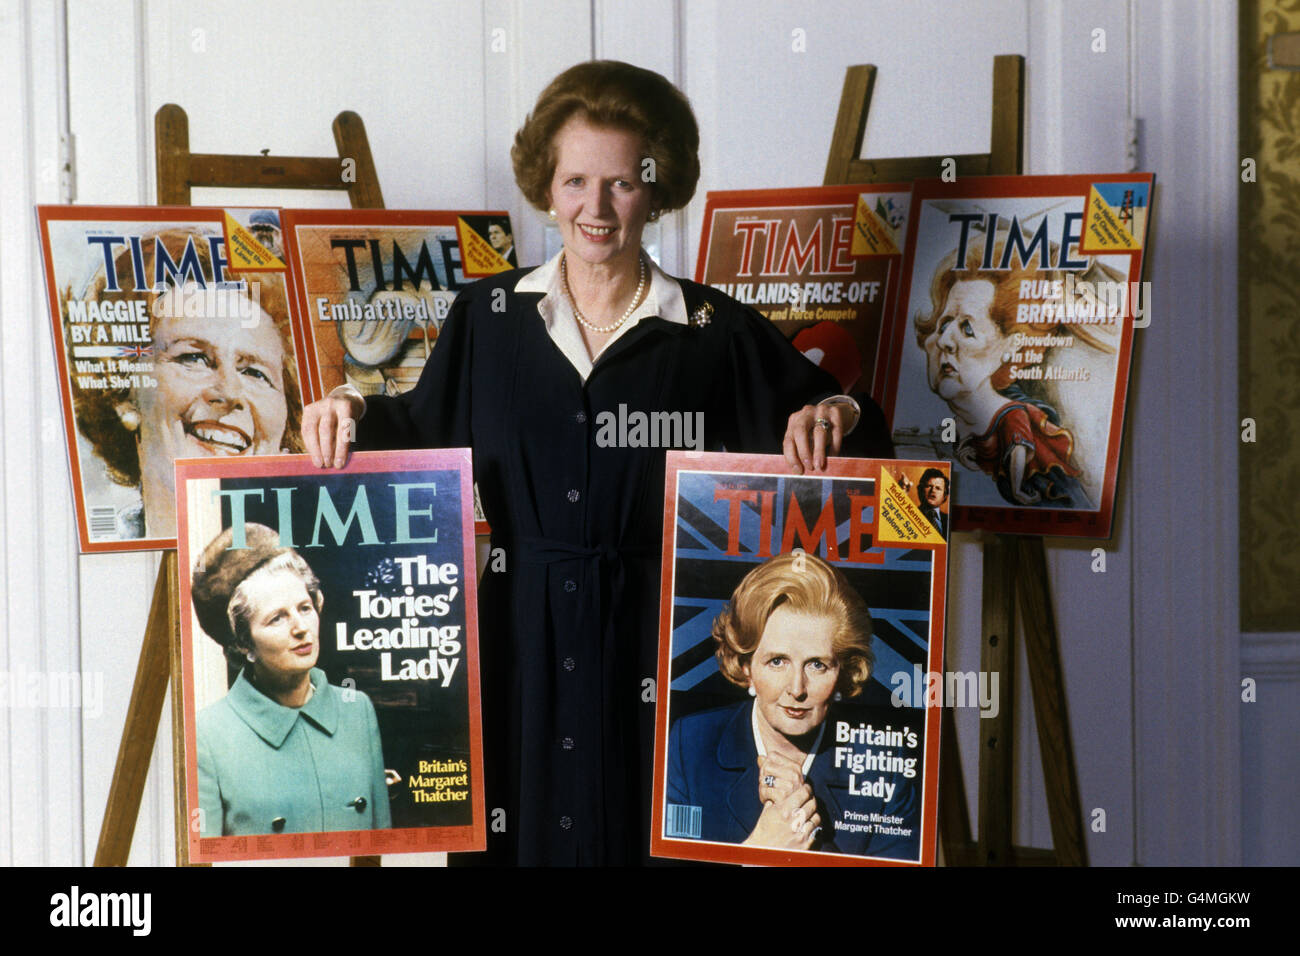 Politics - Time Magazine Cover Exhibition - 10 Downing Street Stock Photo